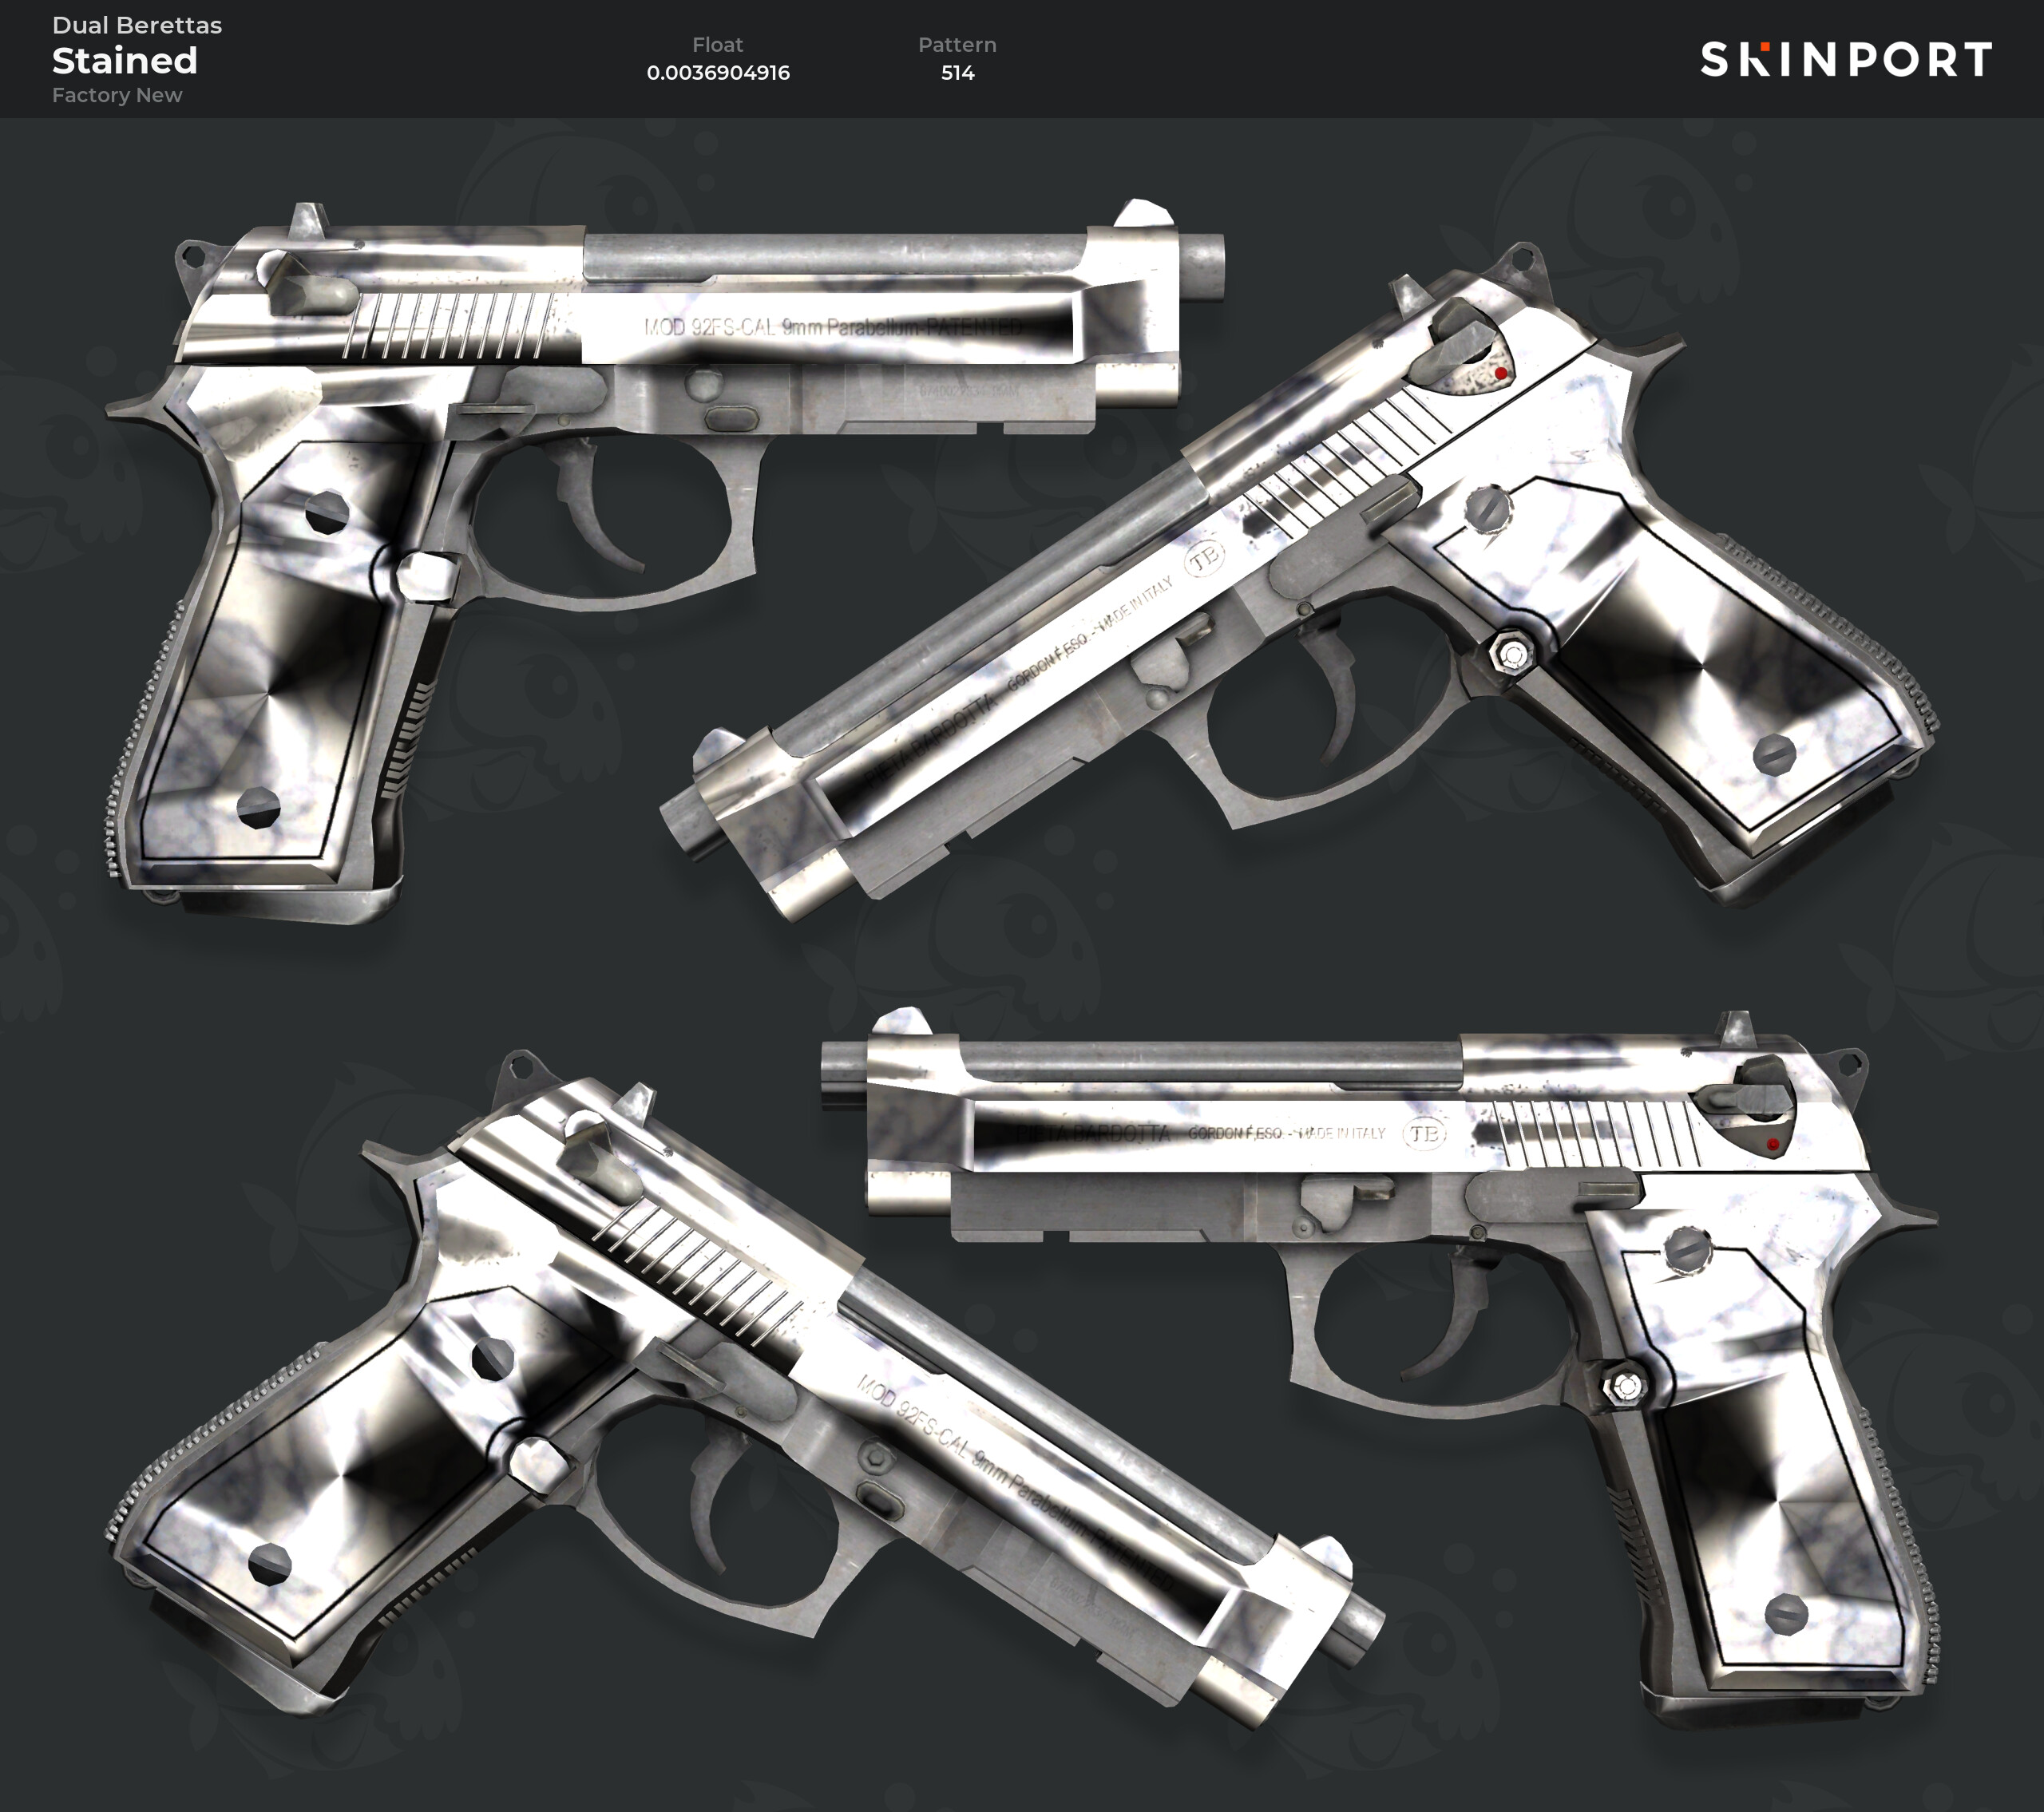 Dual Berettas Stained cs go skin for mac download free